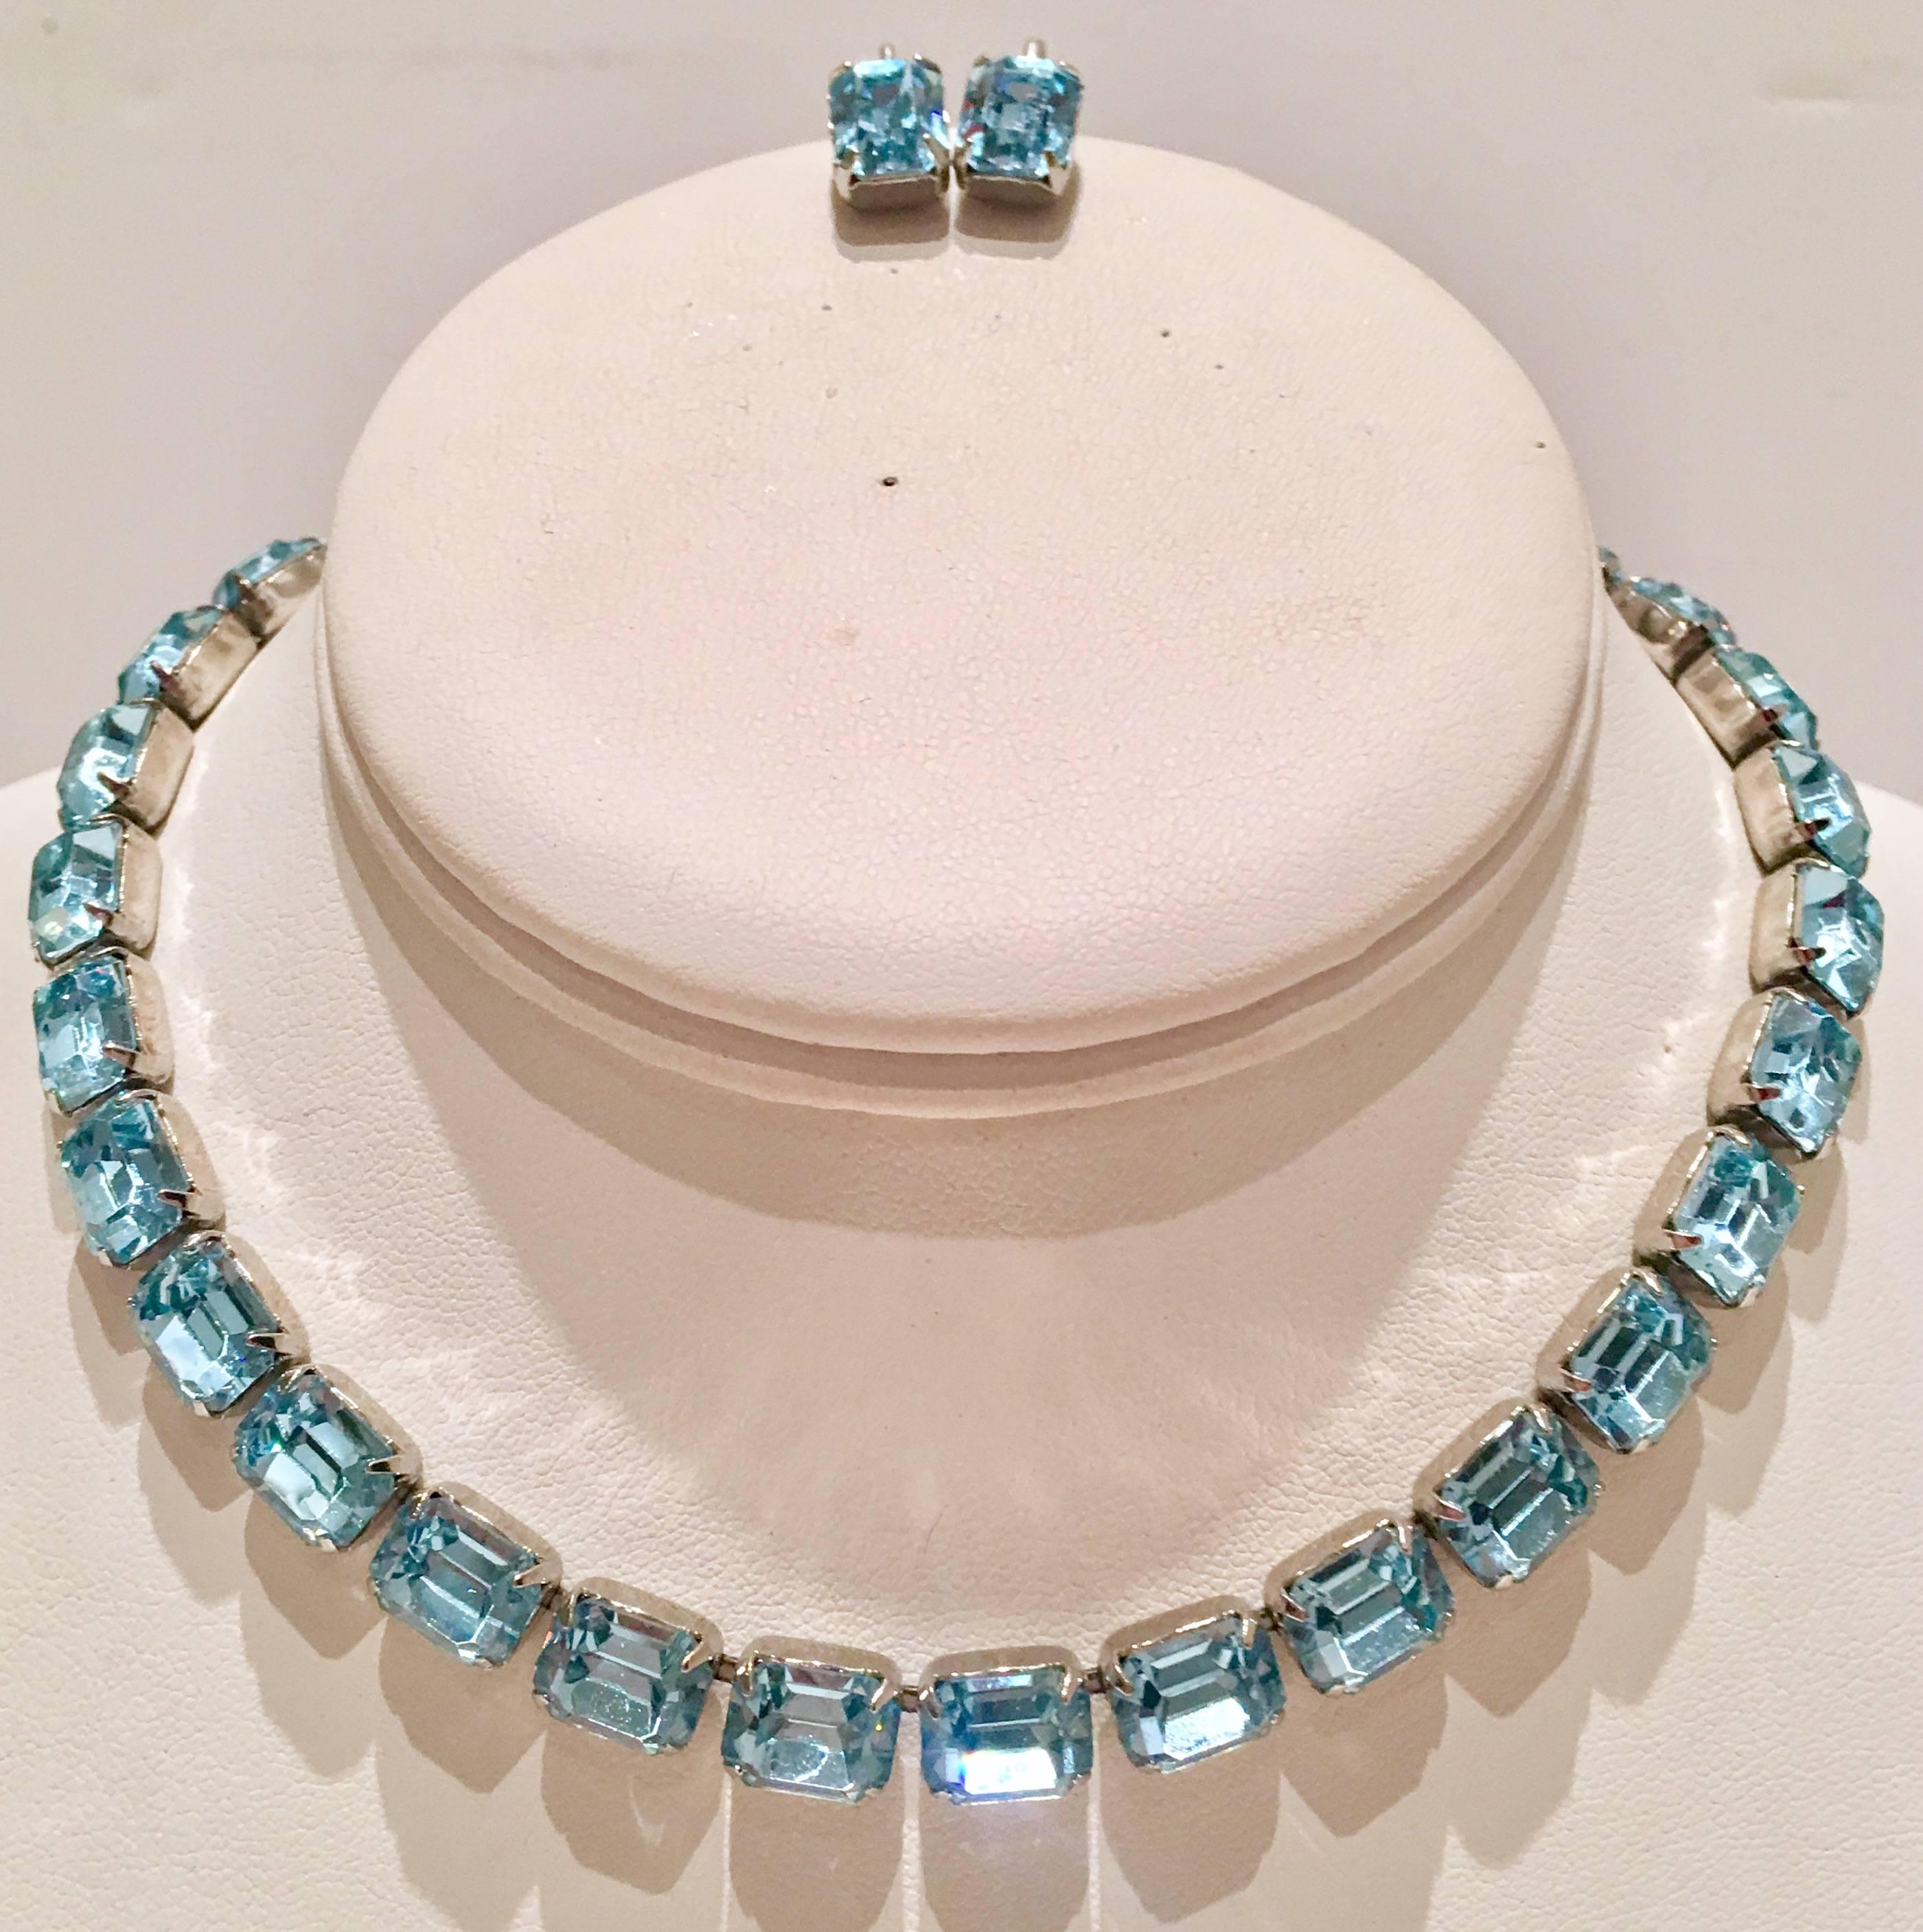 Vintage signed Weiss brilliant sapphire blue Austrian cut crystal three piece set. Set includes a choker style necklace and clip style earrings.
Set in silver tone metal, prong set brilliant emerald cut shape stones. The necklace features a hook